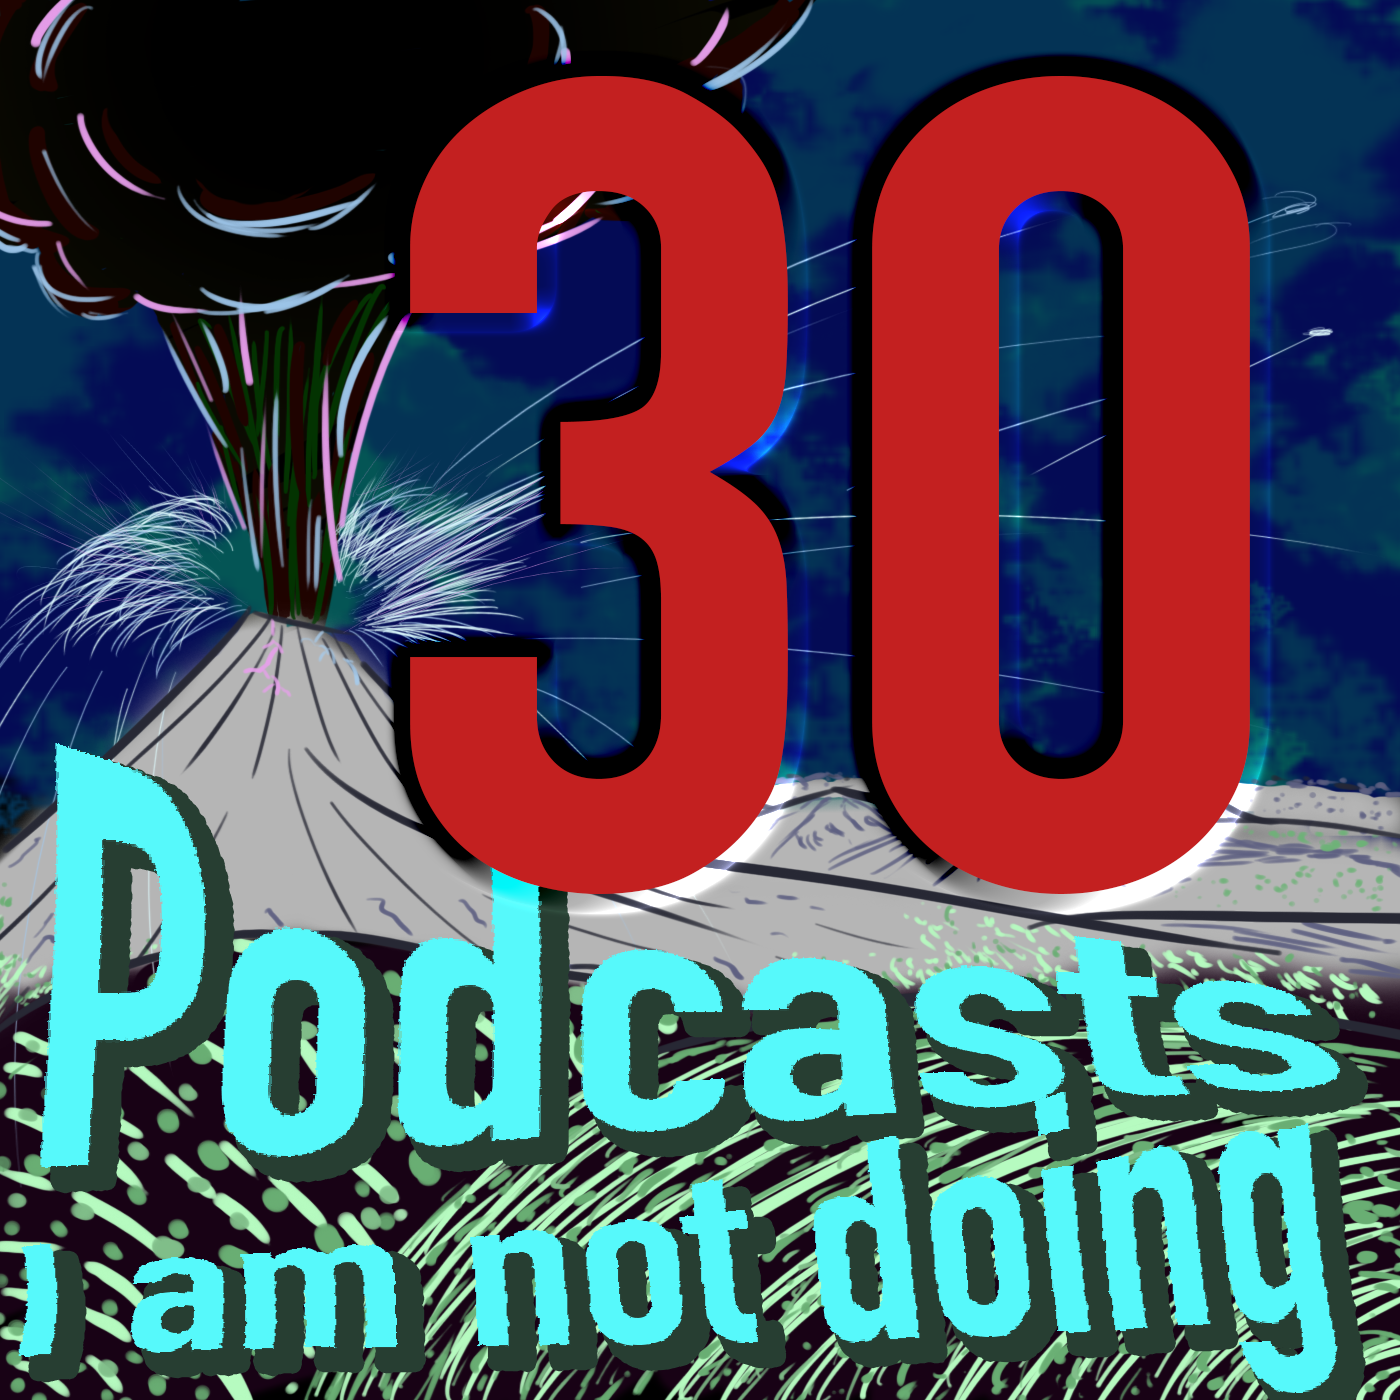 30 Podcasts